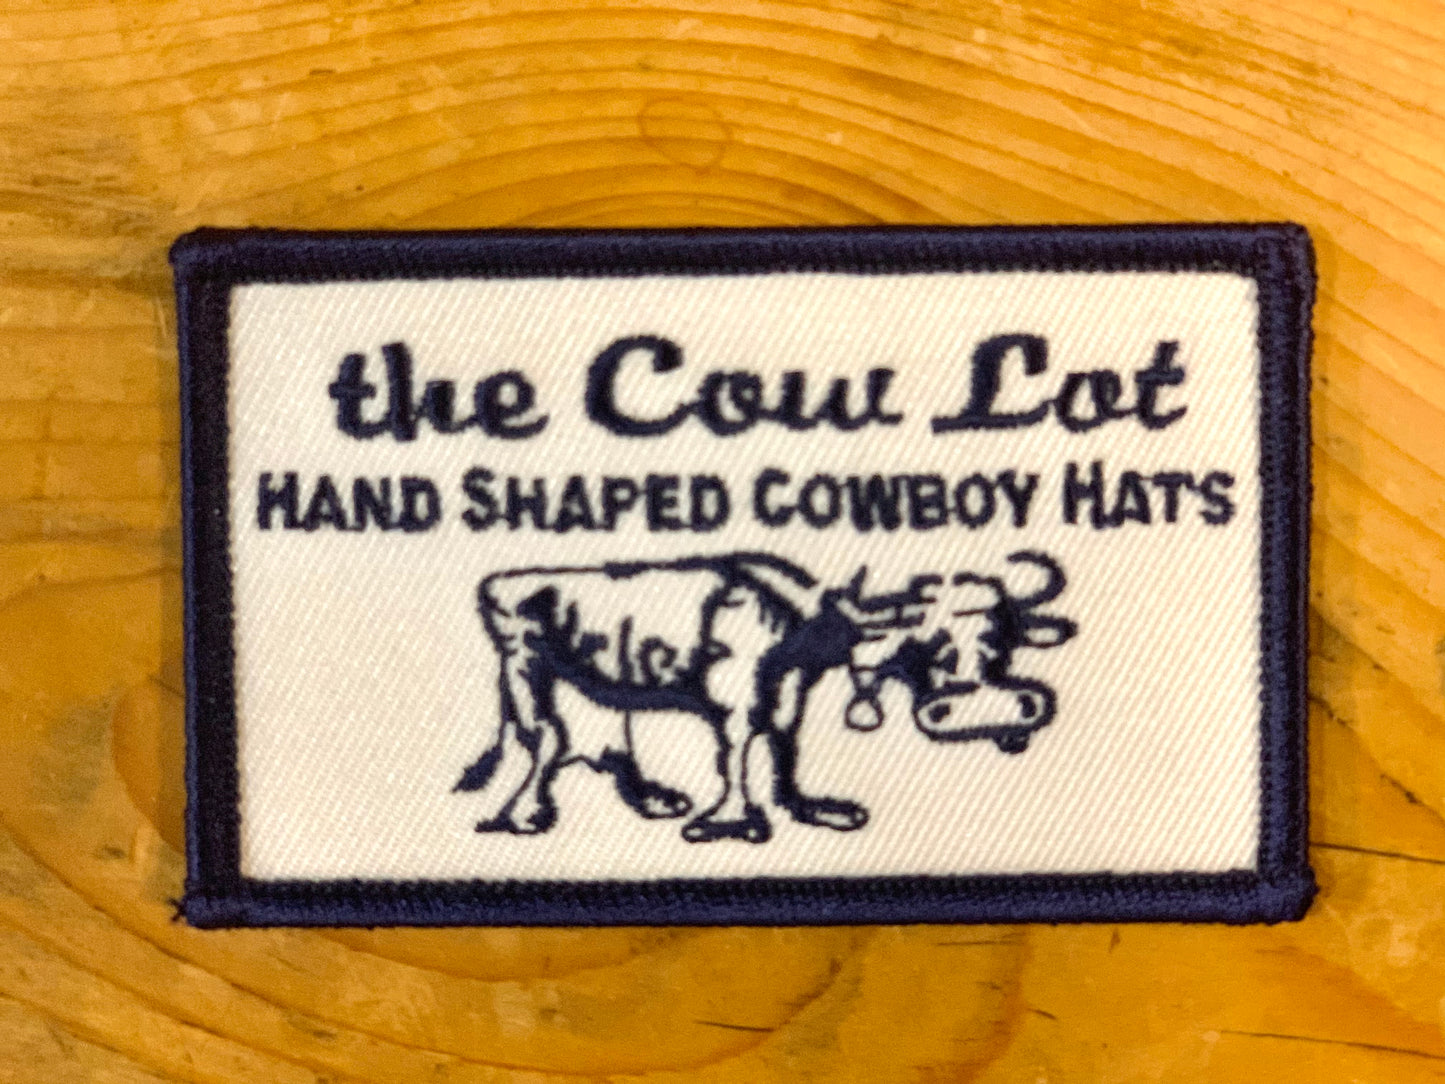 The Cow Lot